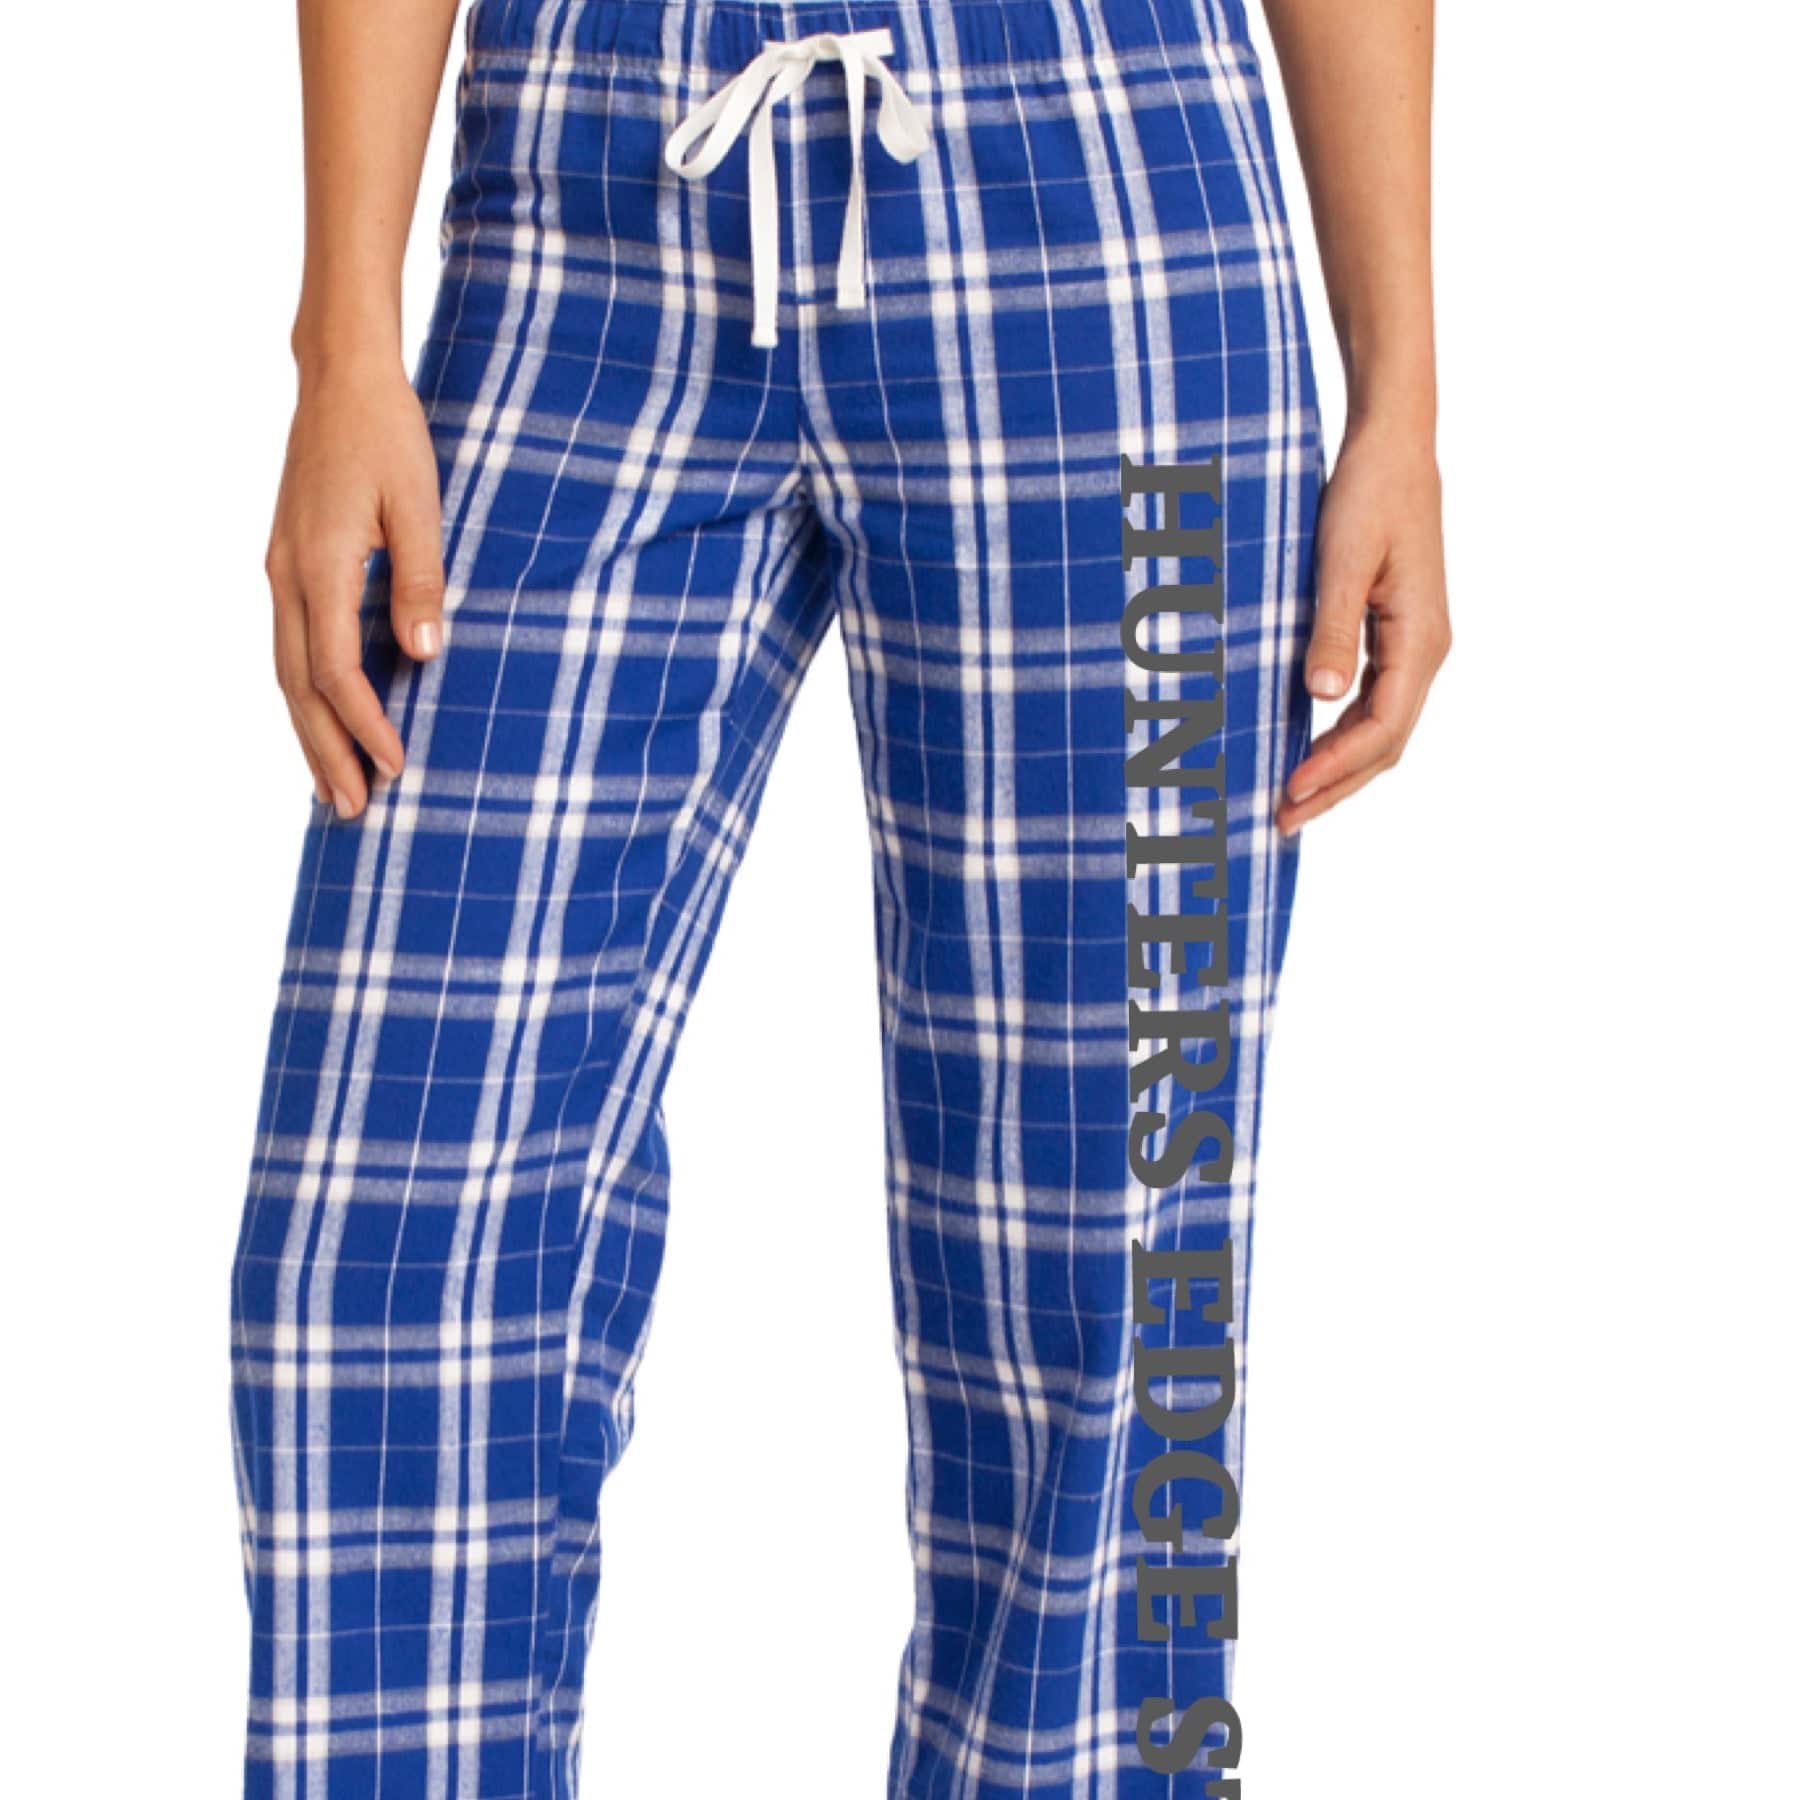 Equestrian Team Apparel Hunters Edge Stables Flannel Pants equestrian team apparel online tack store mobile tack store custom farm apparel custom show stable clothing equestrian lifestyle horse show clothing riding clothes horses equestrian tack store